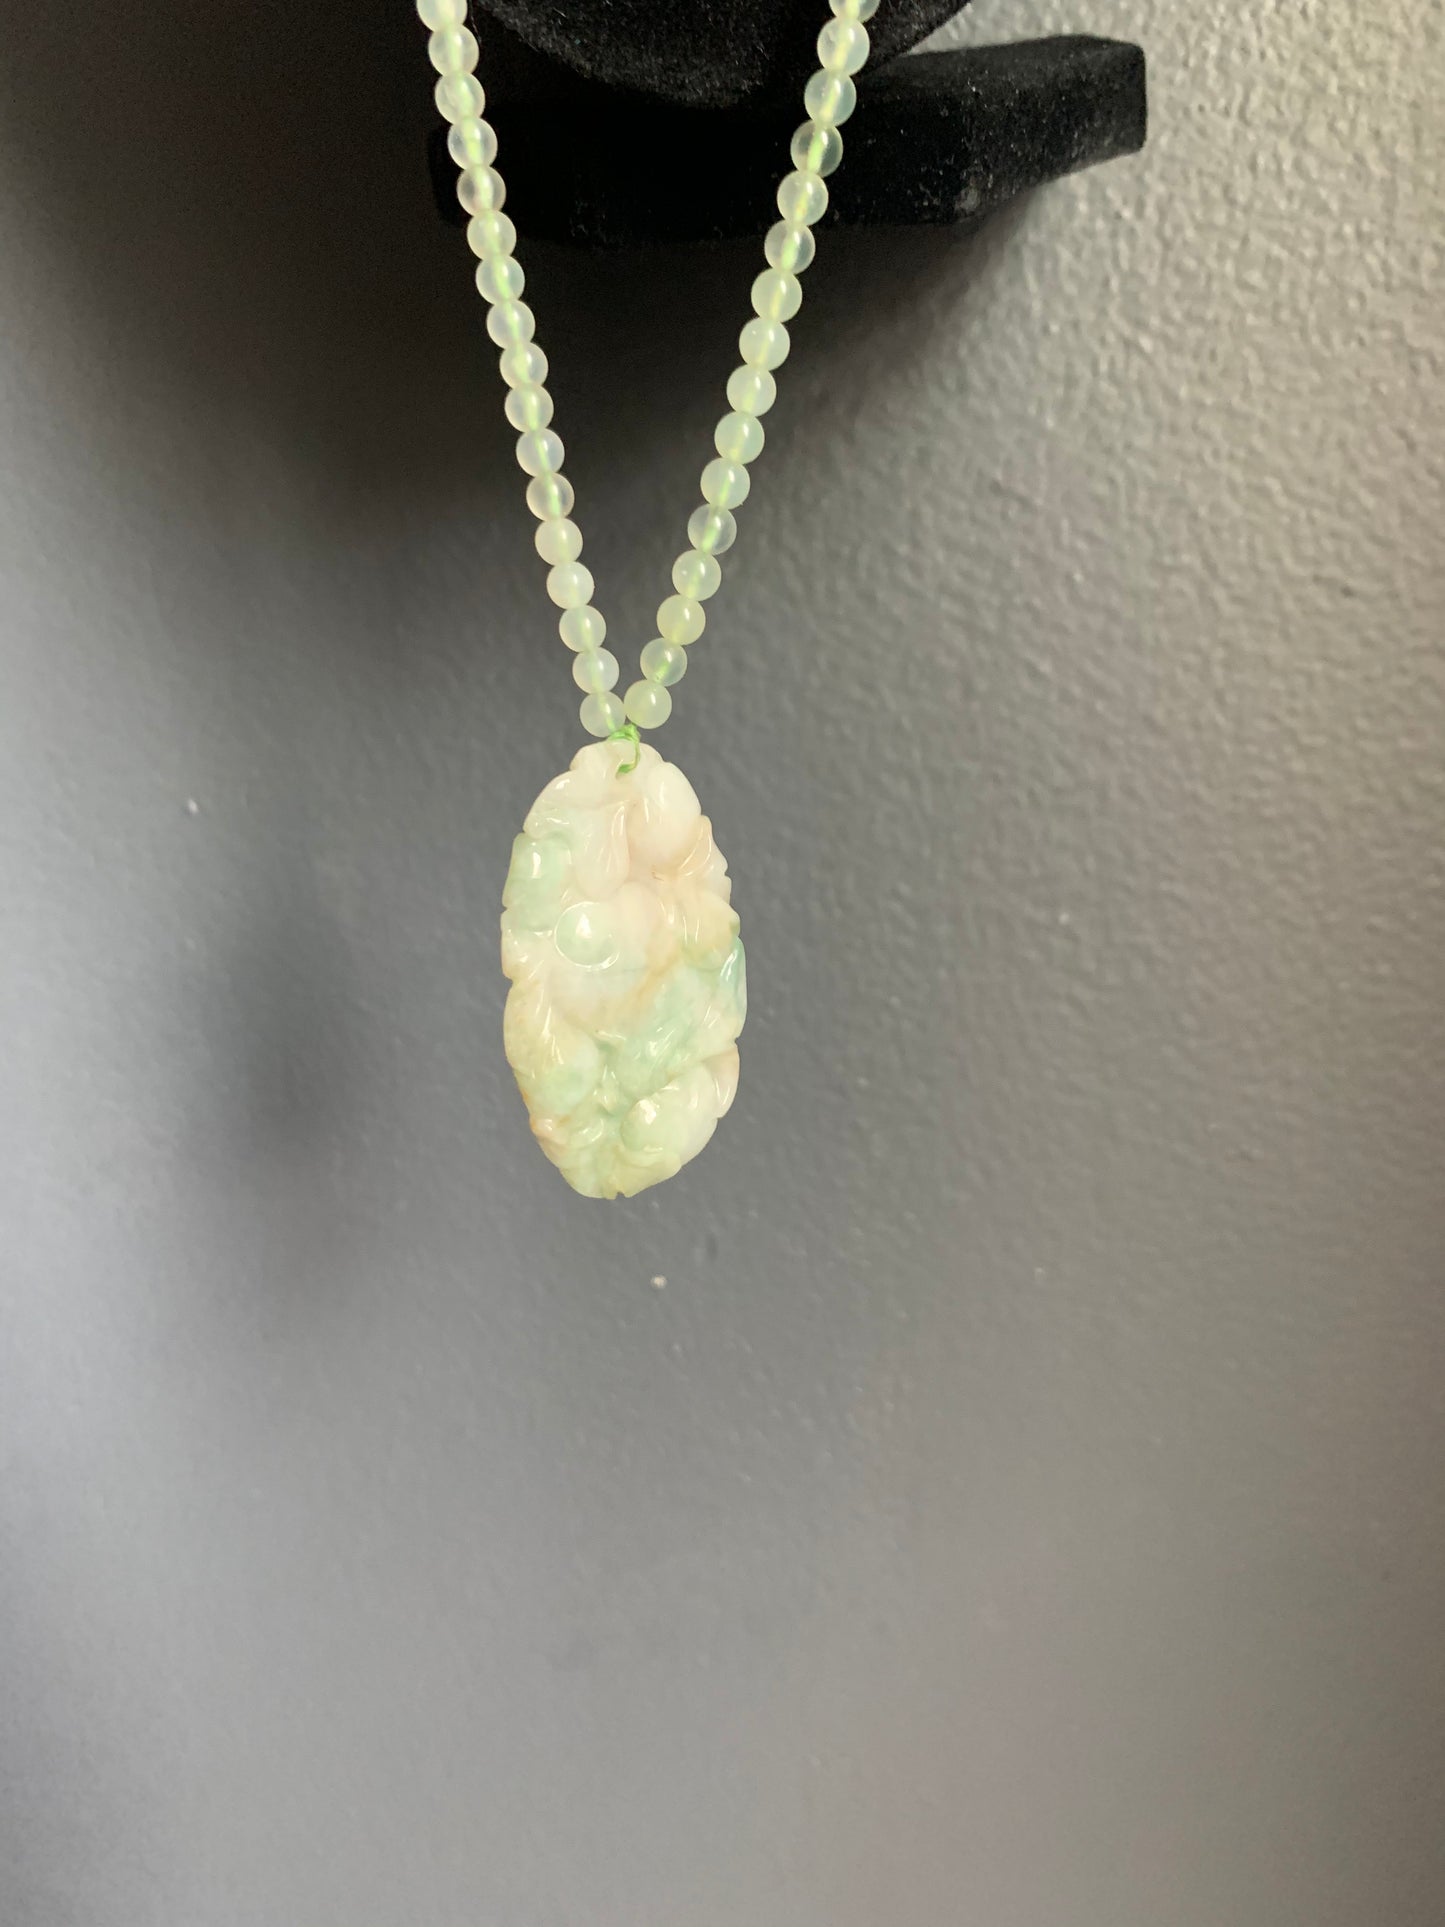 A jade necklace and pendant